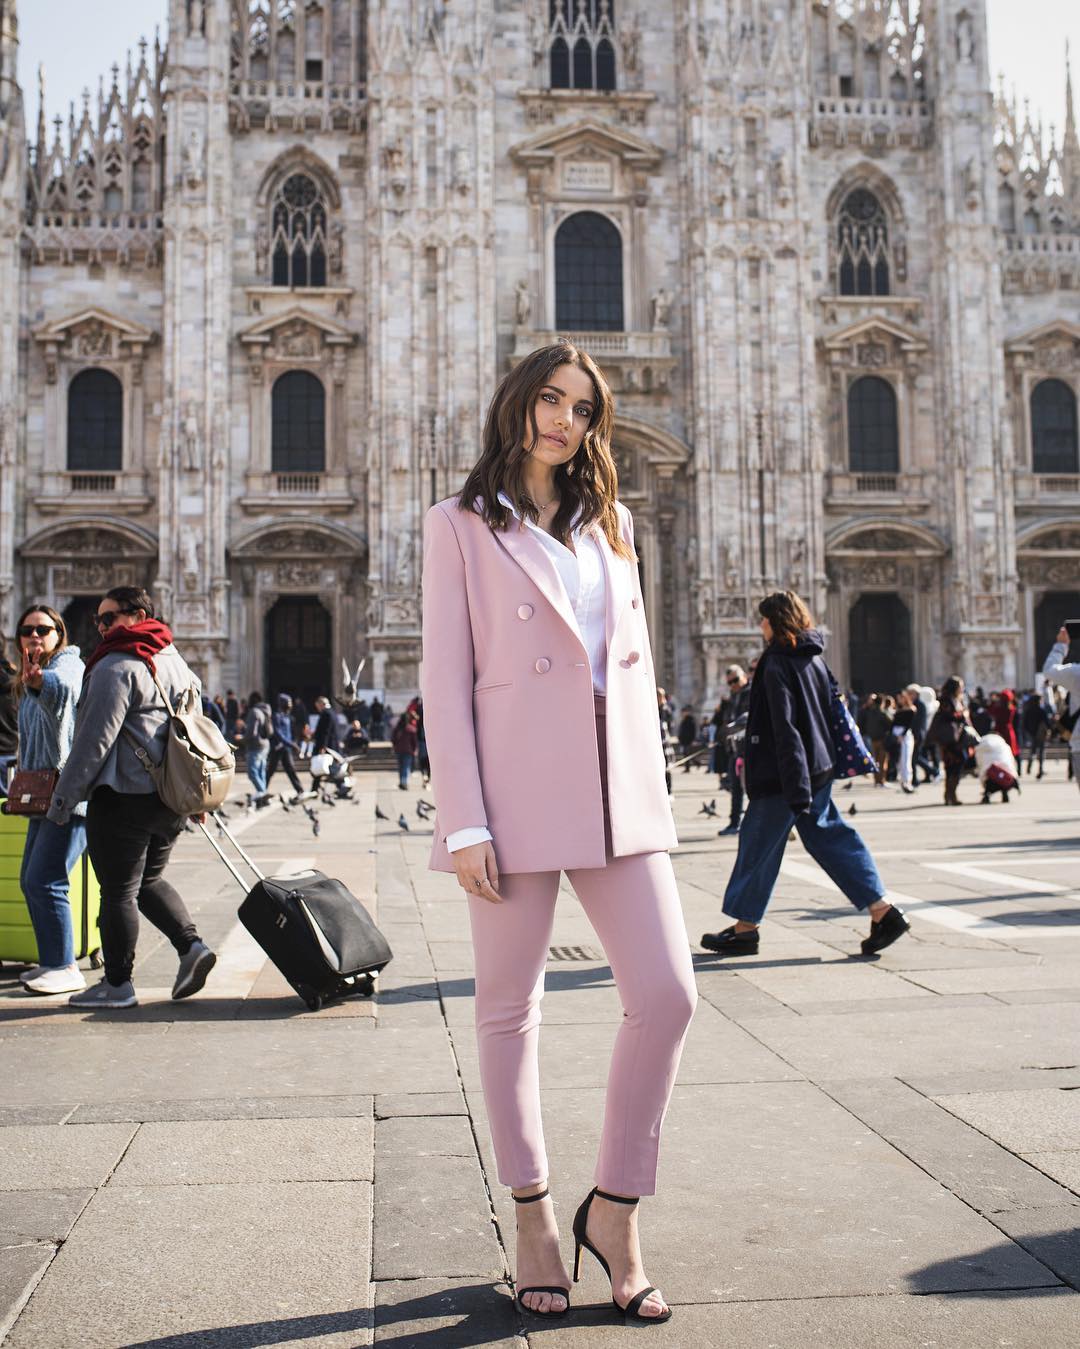 Dorra Zarrouk Paired Her Hot Pink Pantsuit With Comfy Sneakers for